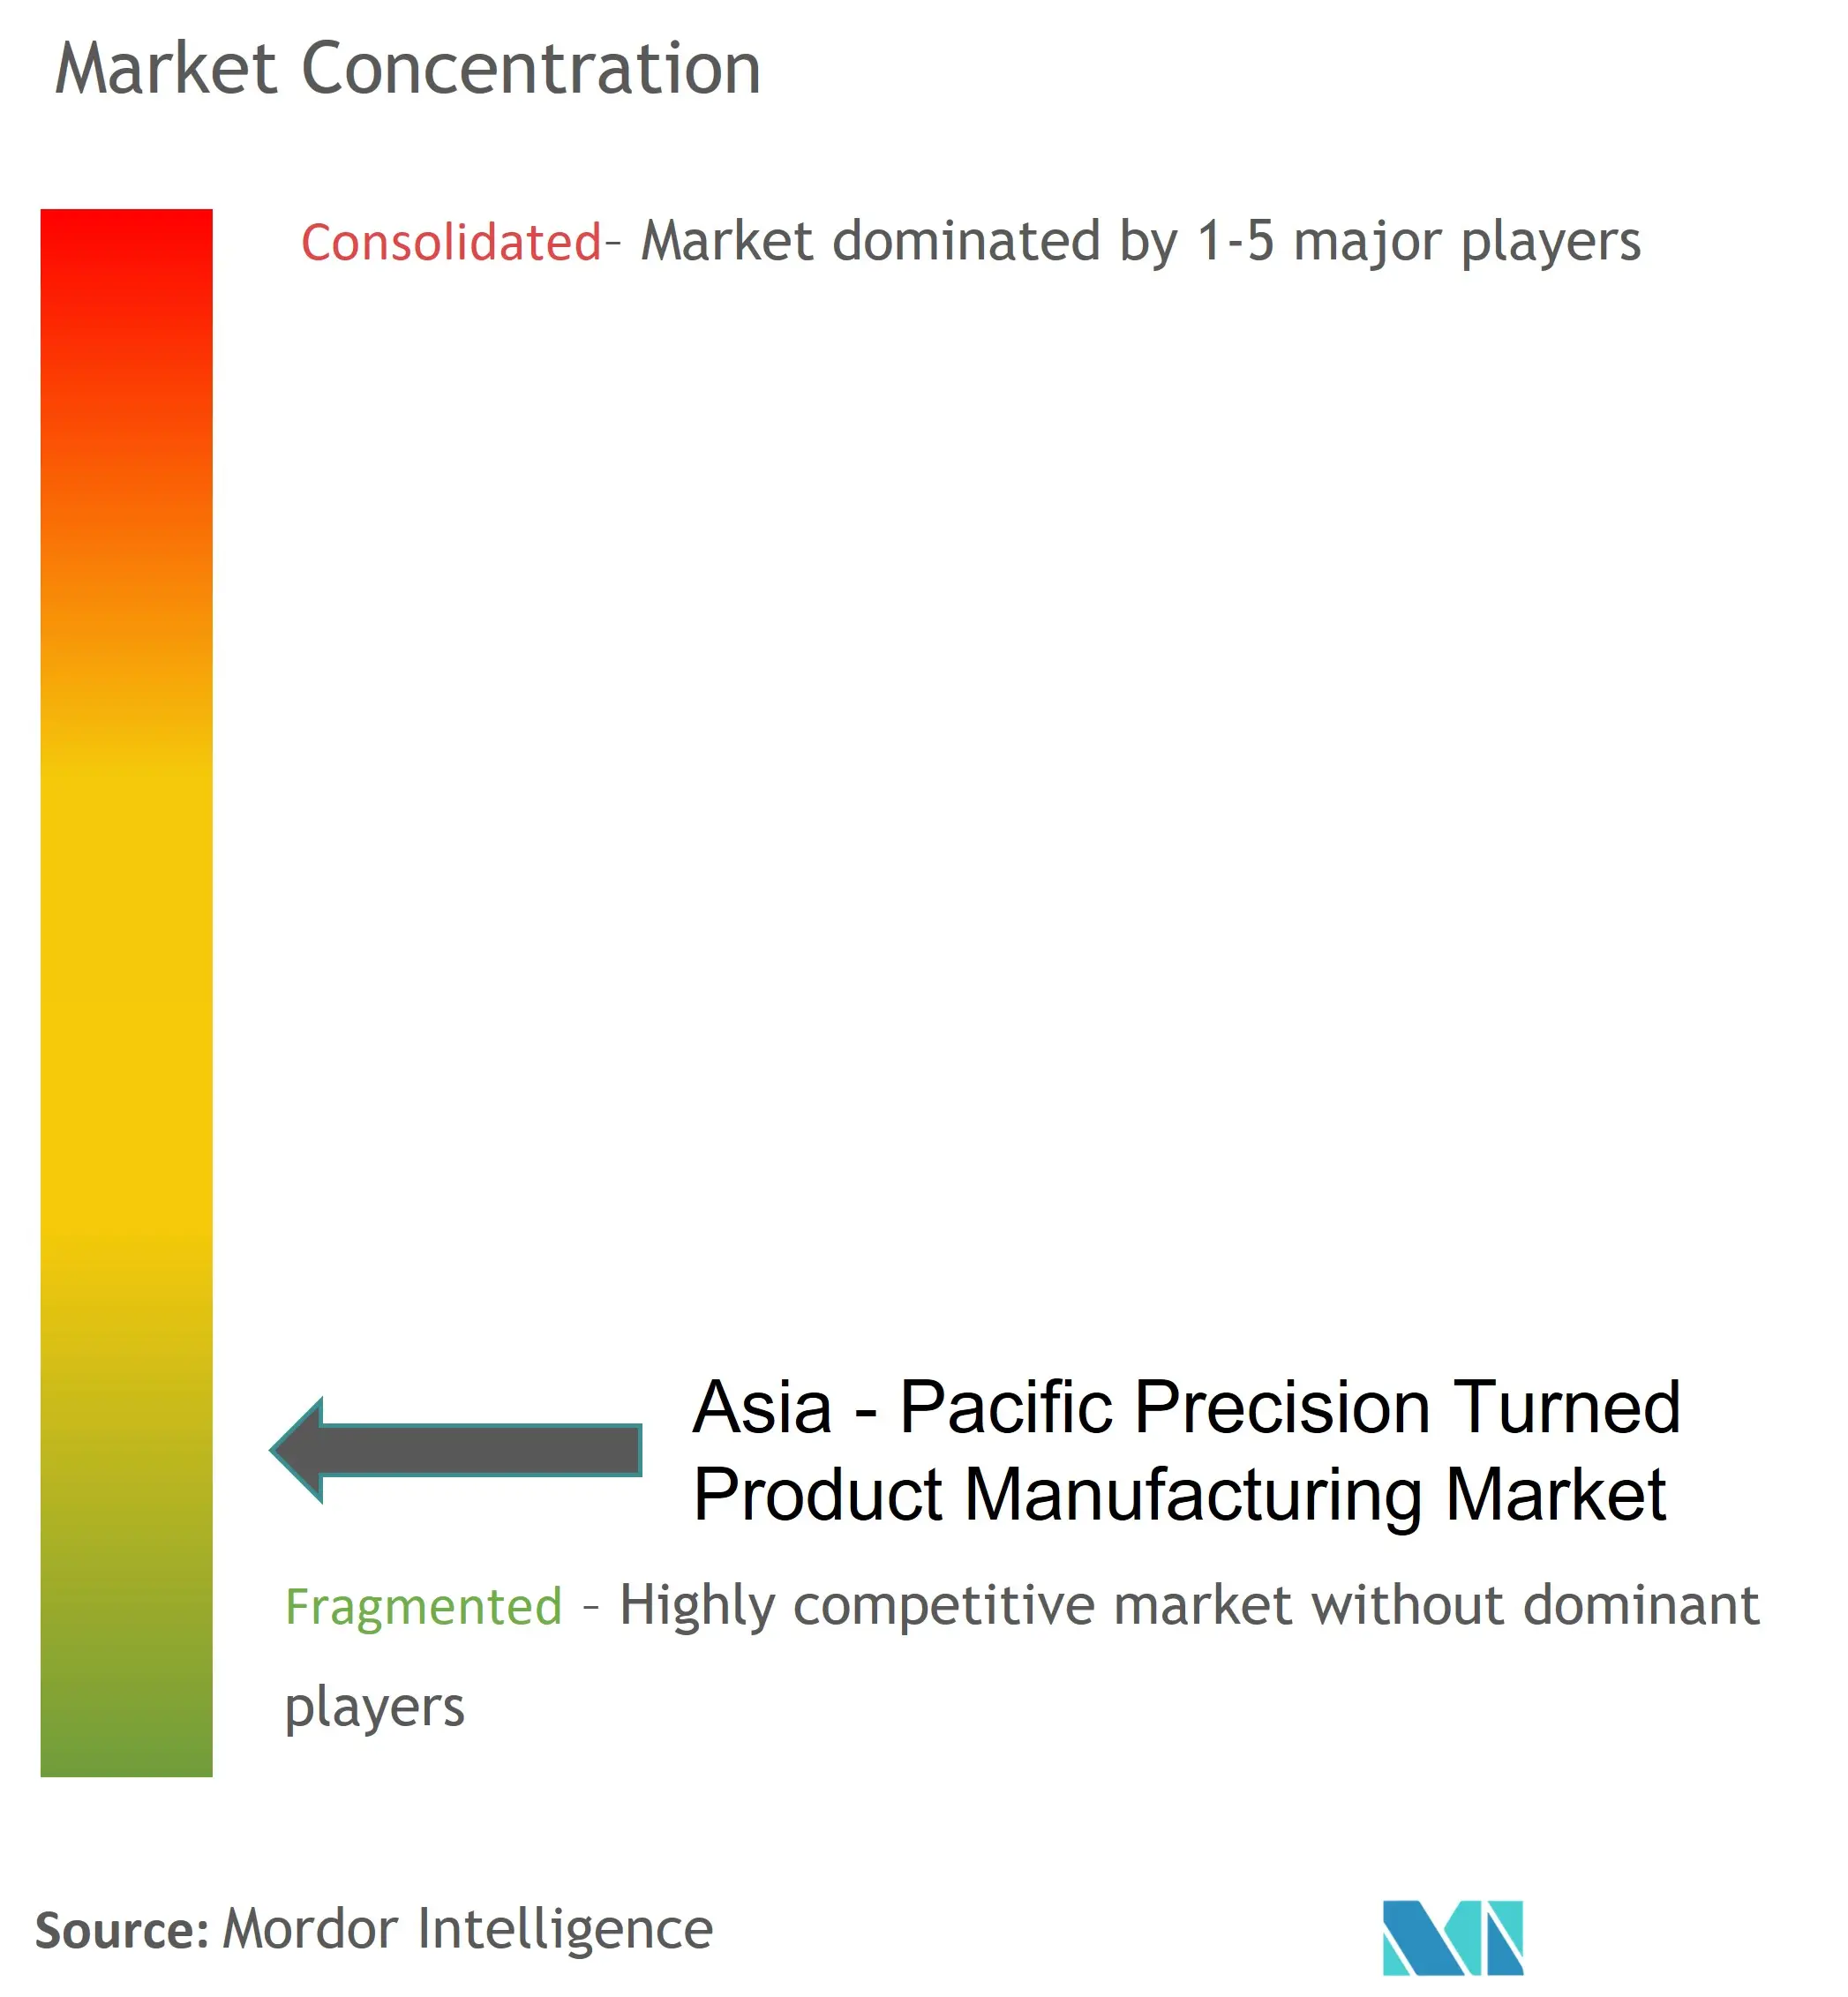 Asia - Pacific Precision Turned Product Manufacturing Market Concentration